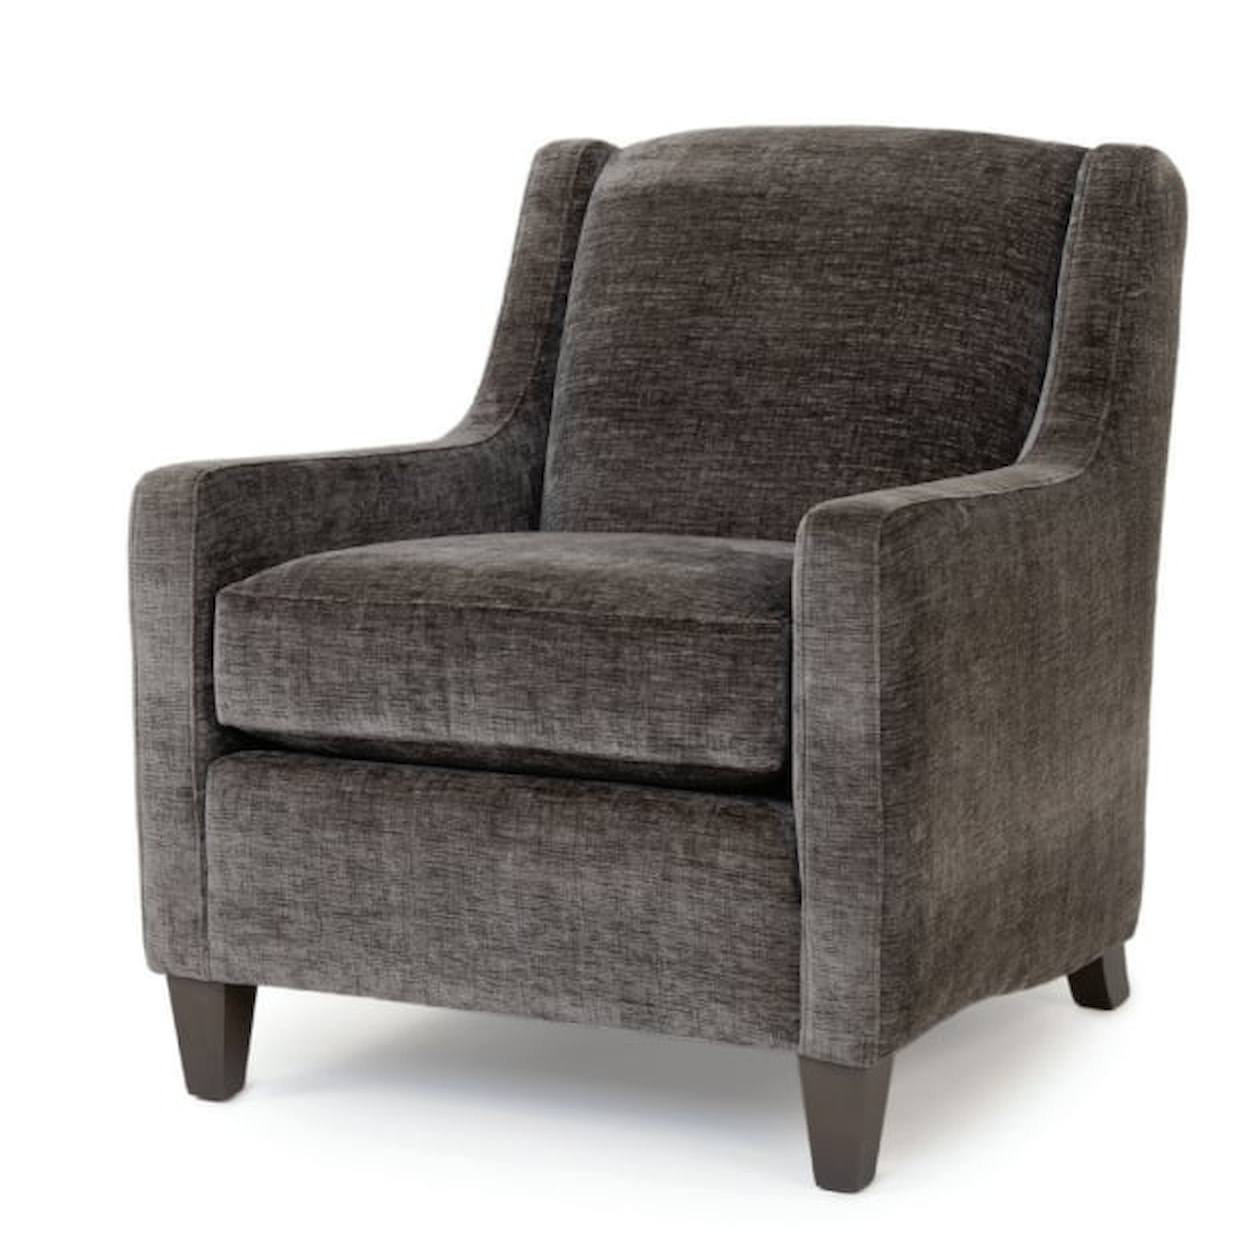 Smith Brothers 272 Accent Chair